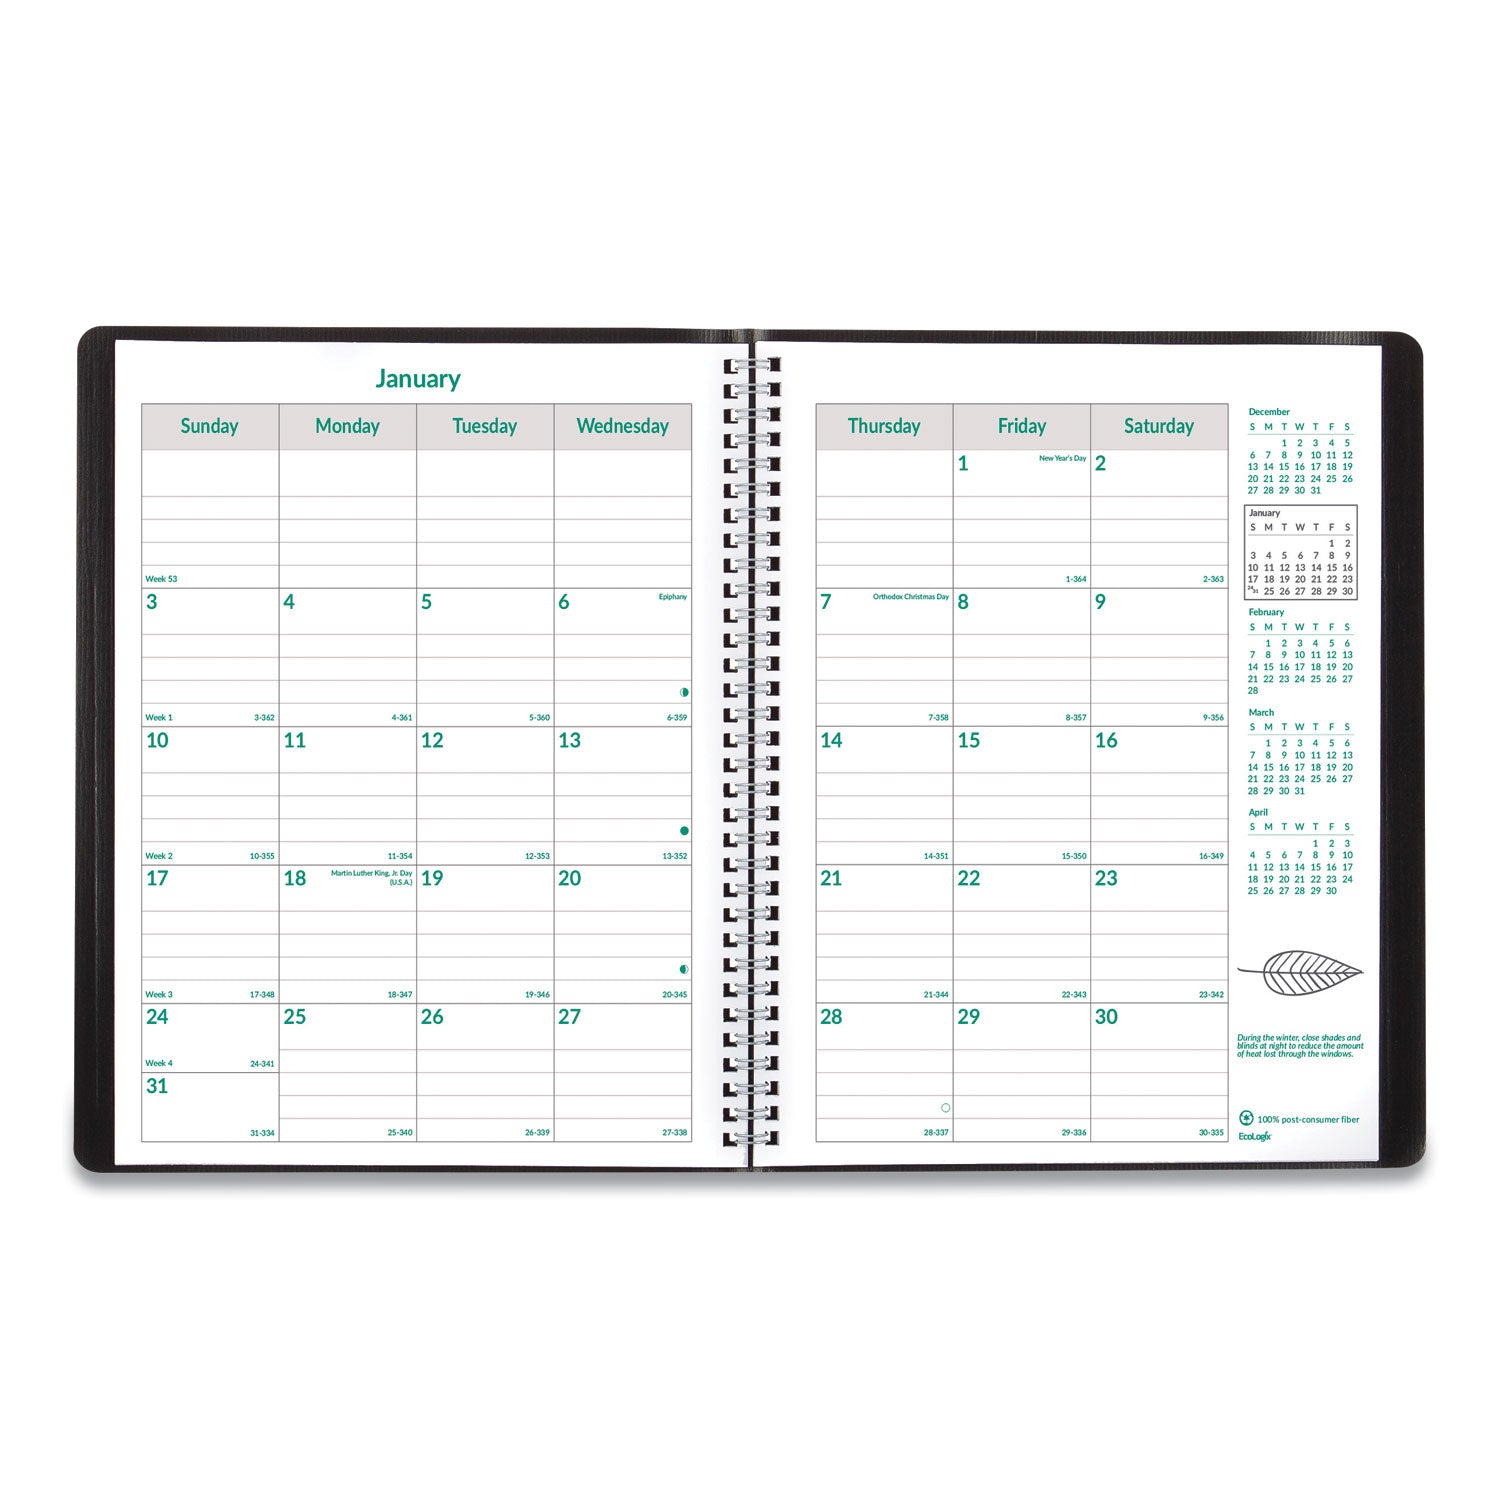 ecologix-recycled-monthly-planner-ecologix-artwork-11-x-85-black-cover-14-month-dec-to-jan-2023-to-2025_redcb435wblk - 2